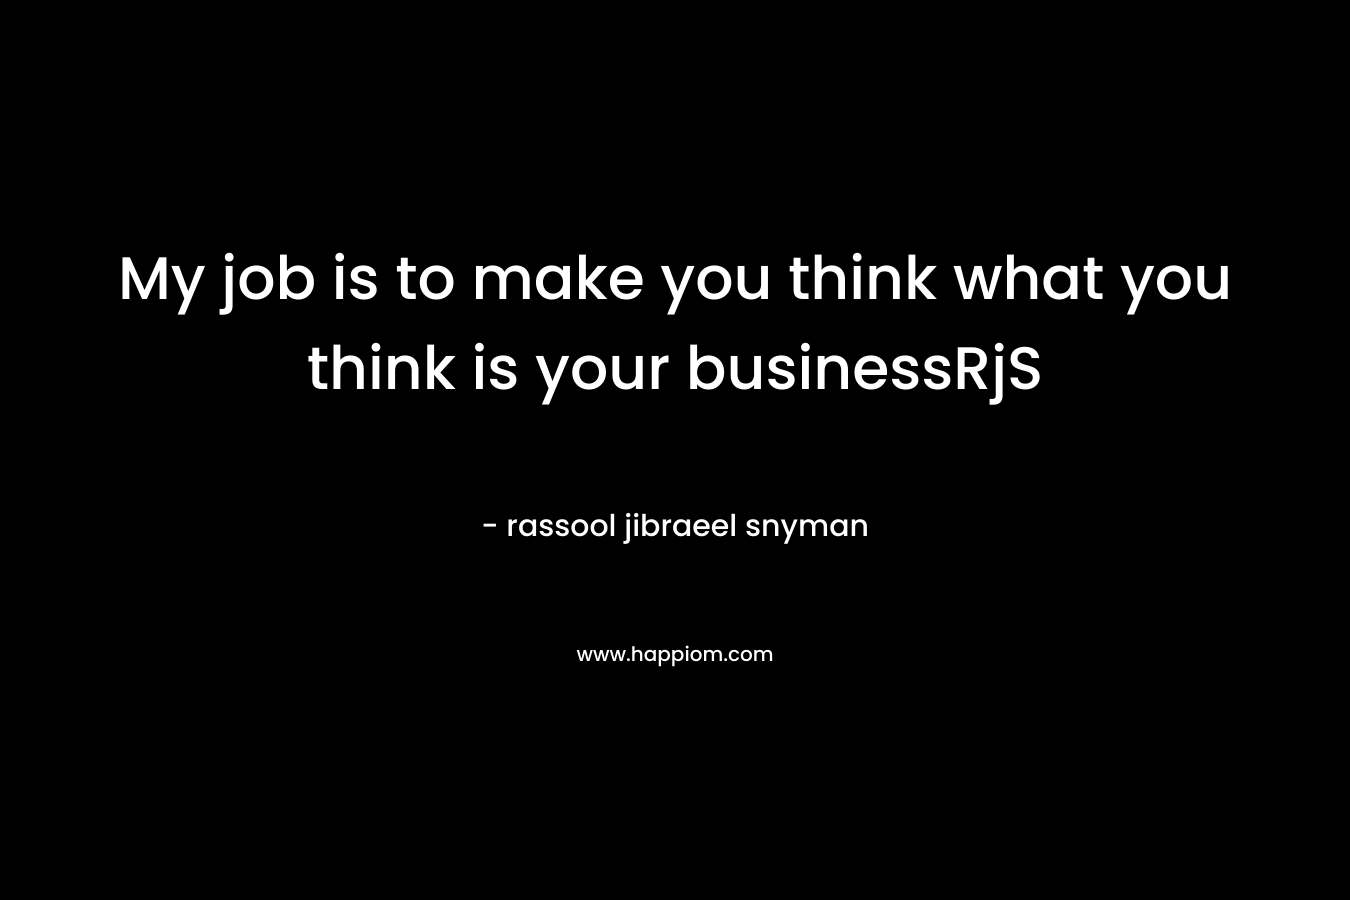 My job is to make you think what you think is your businessRjS